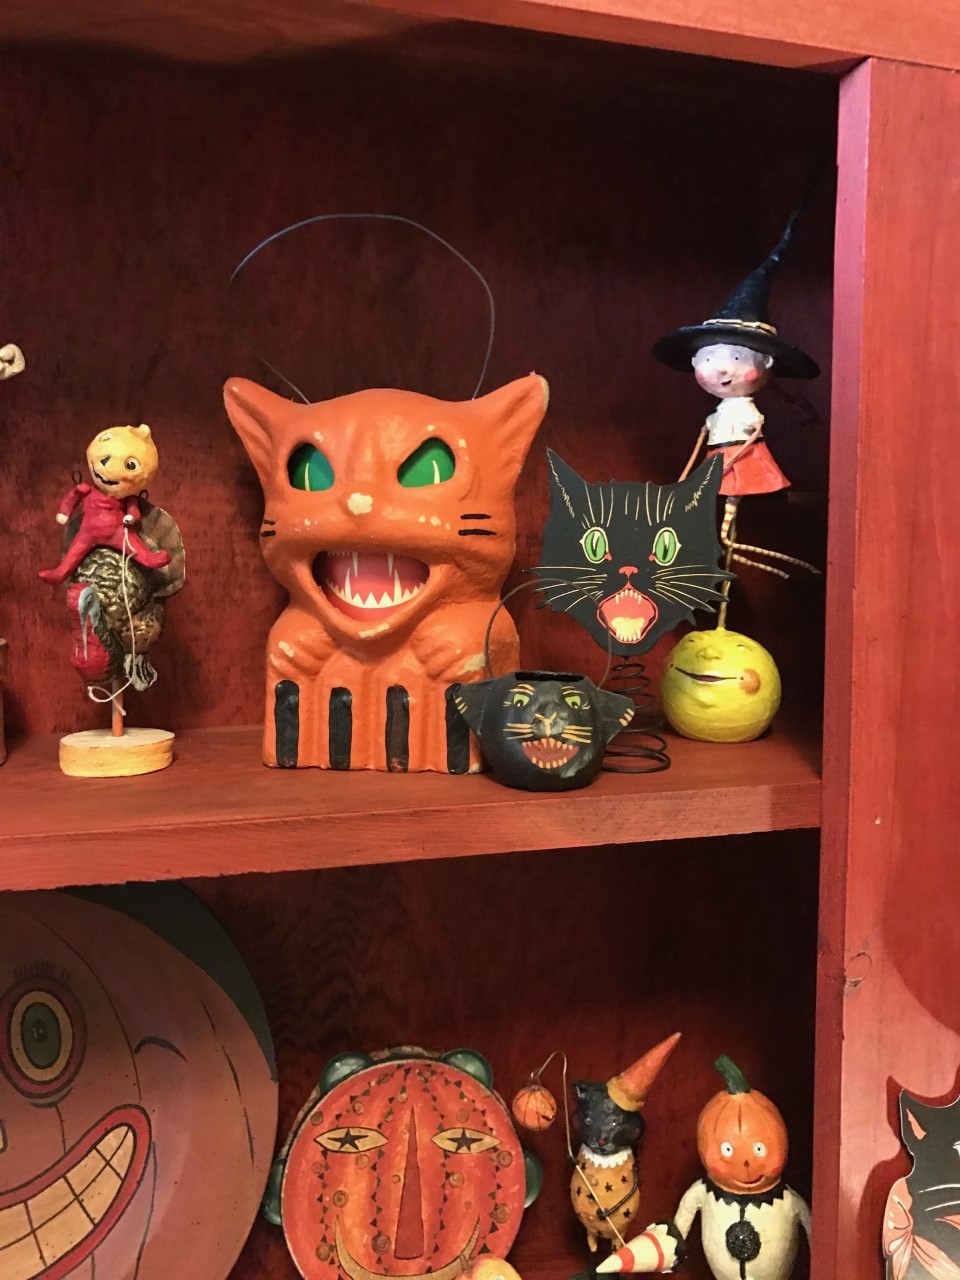 How'd You Do That?: HALLOWEEN DISPLAY CABINET, RUSTIC